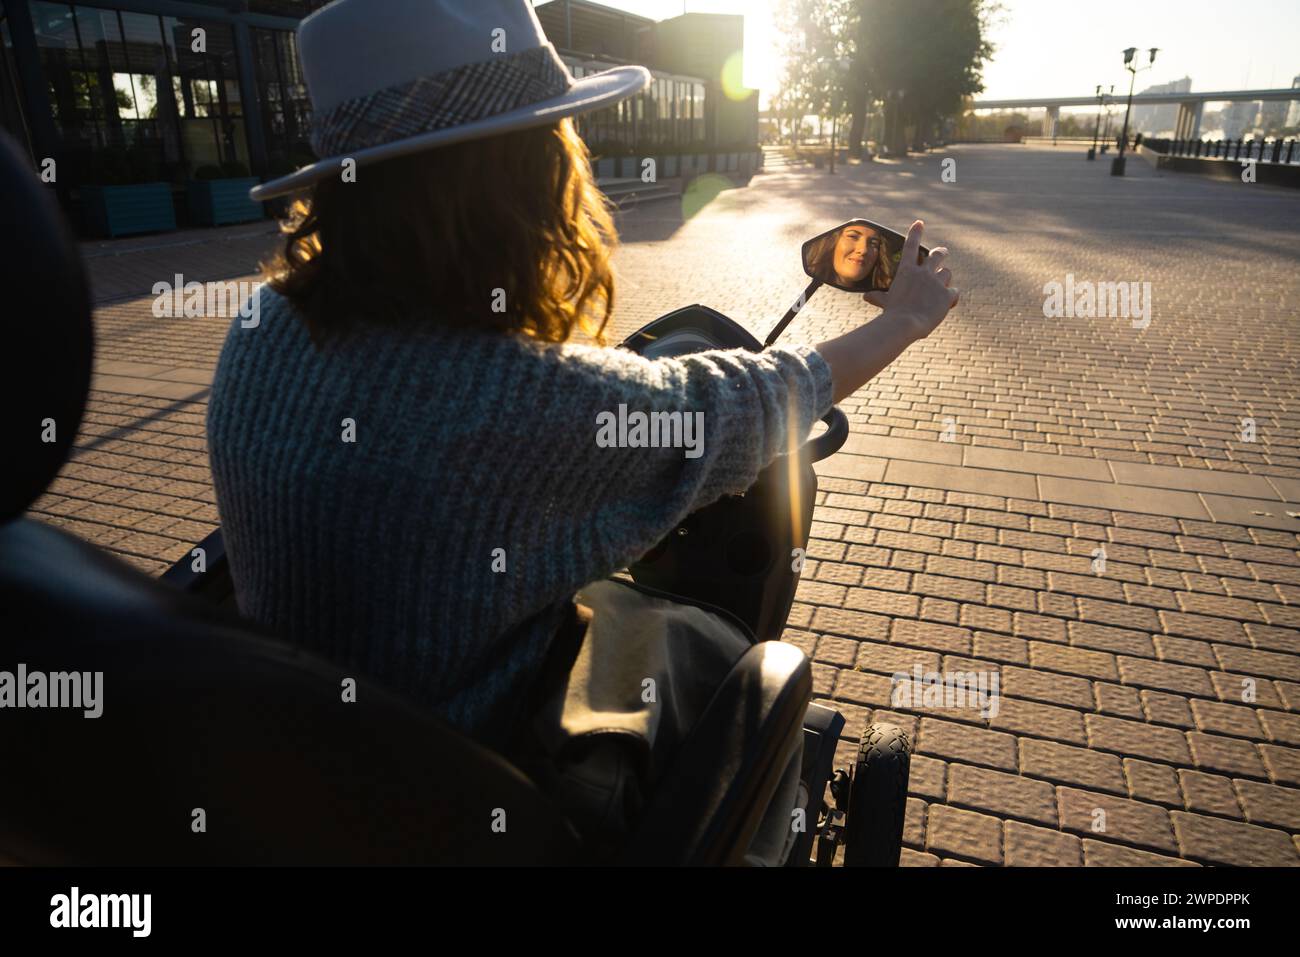 Woman tourist on a four wheel mobility electric scooter on a city street. The woman's face is visible in the rearview mirror. Stock Photo